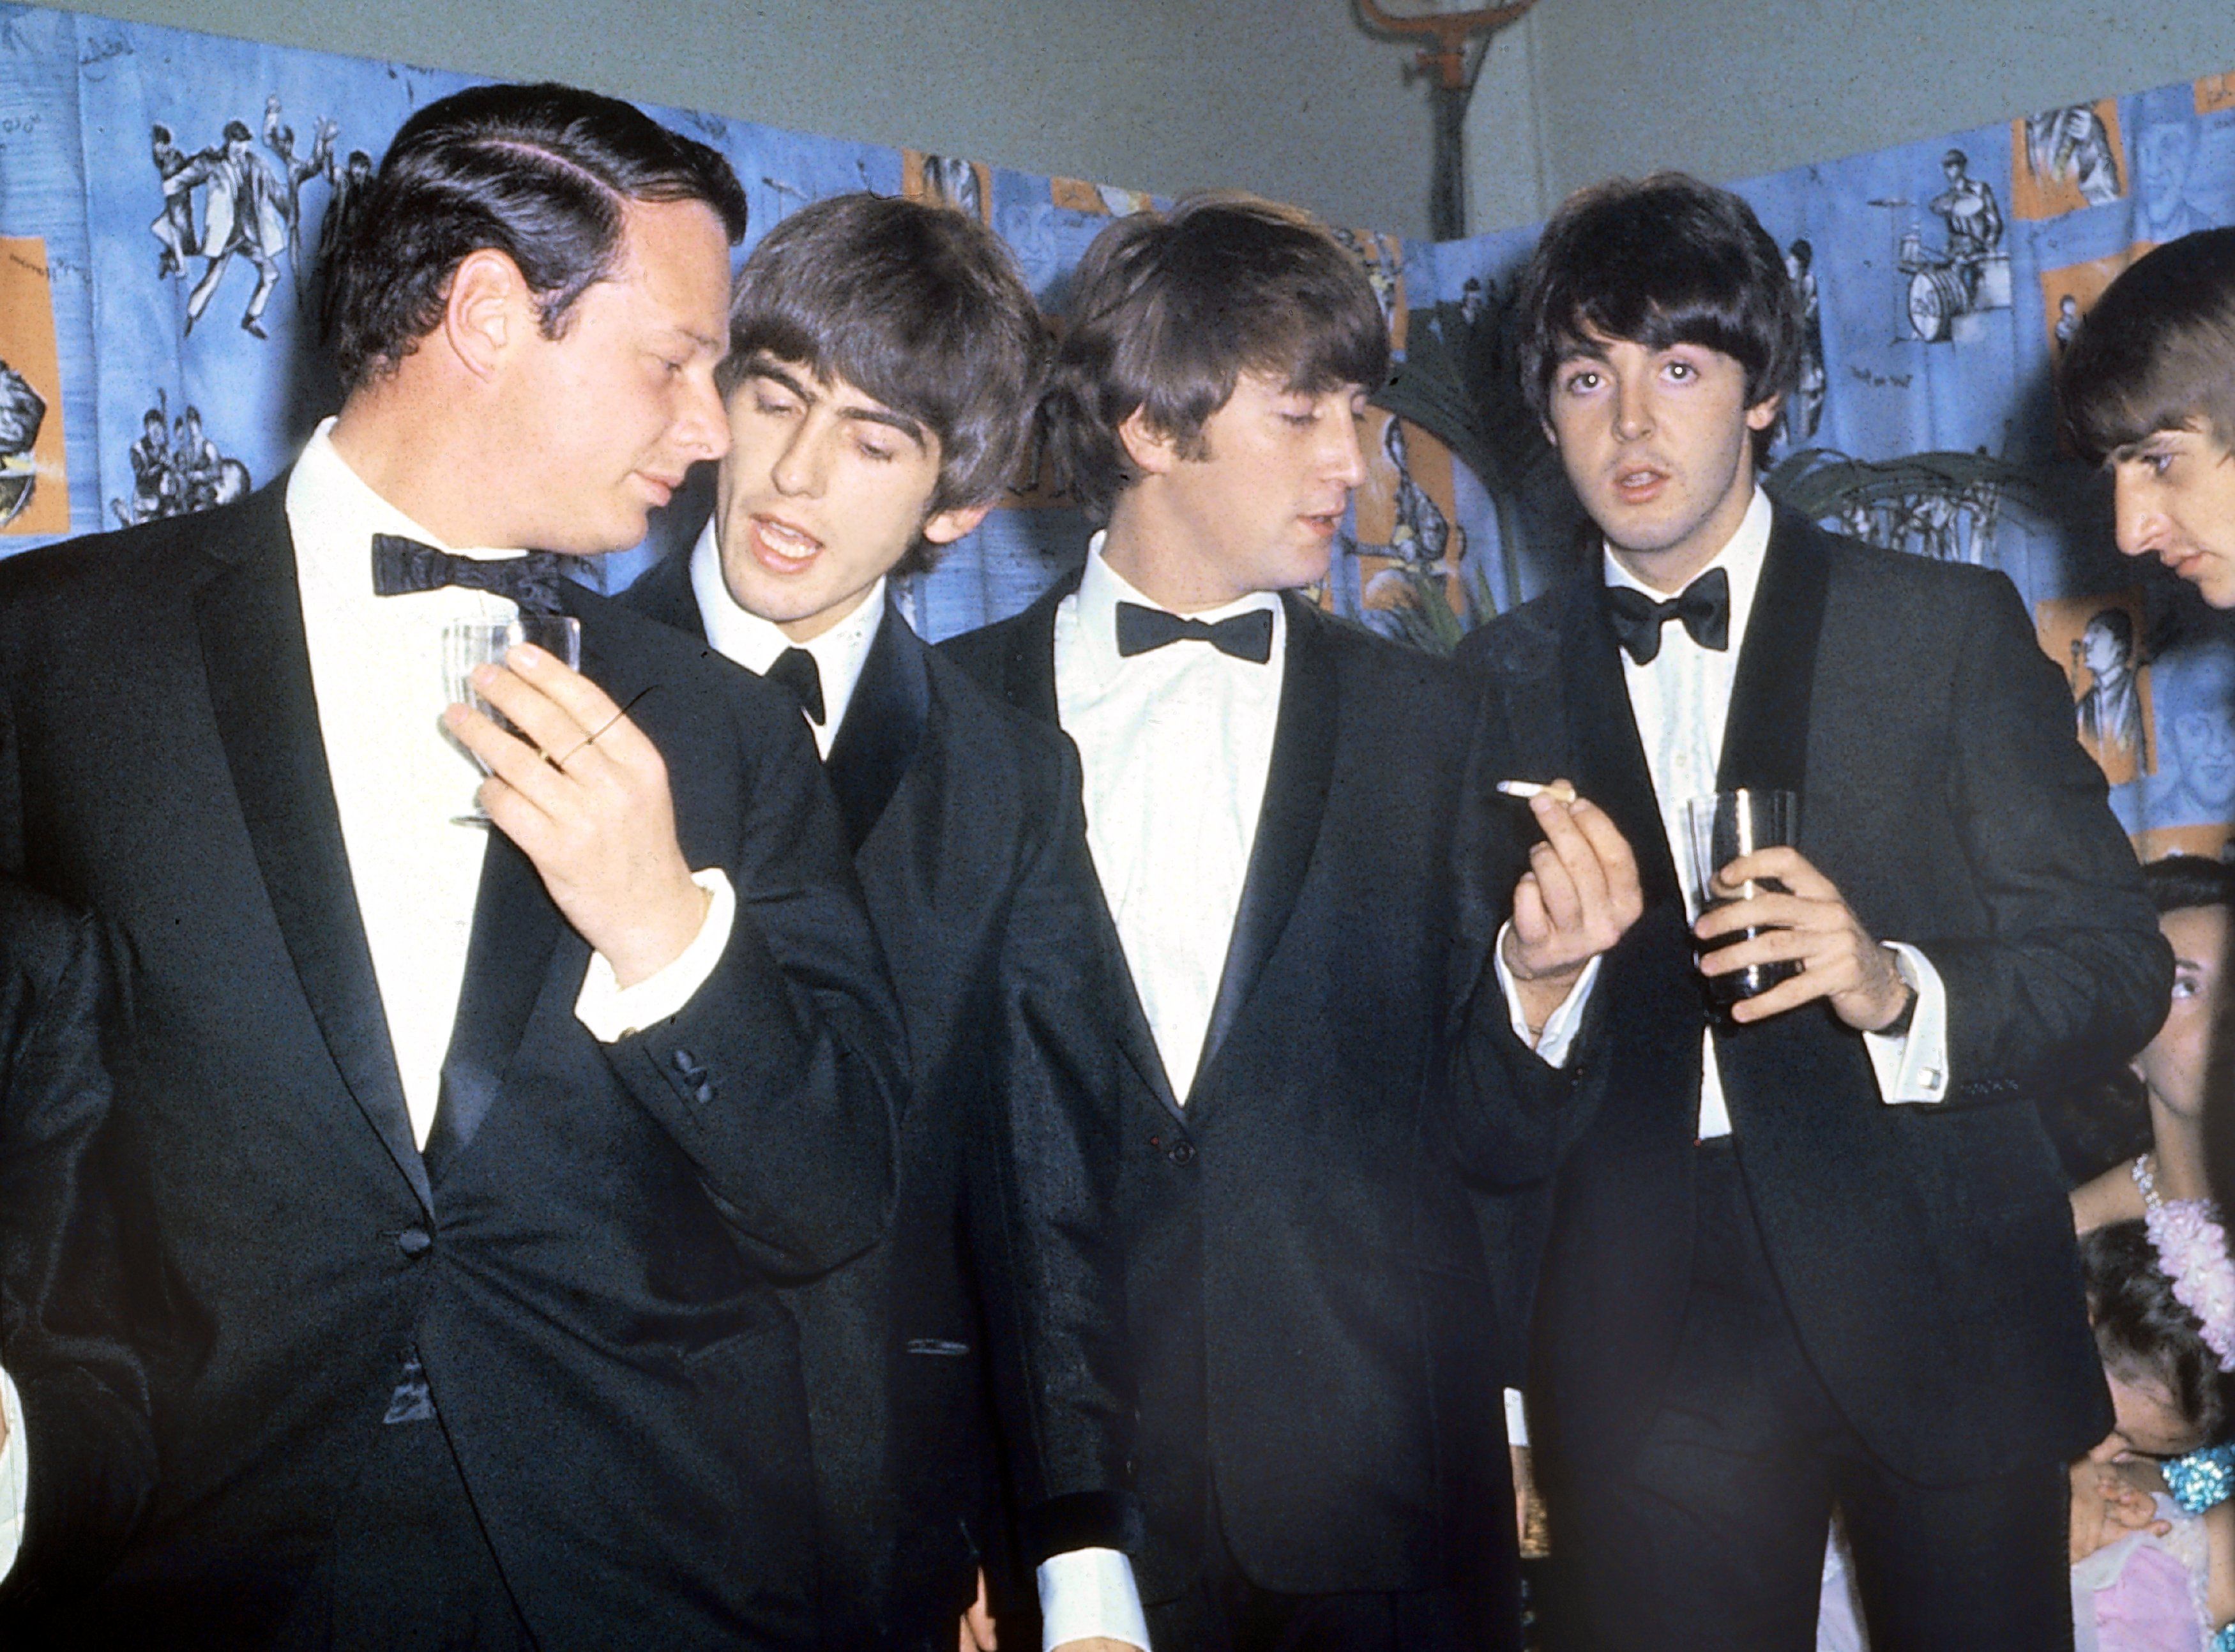 Portrait of The Beatles with their manager Brian Epstein at a reception between 1964 and 1966